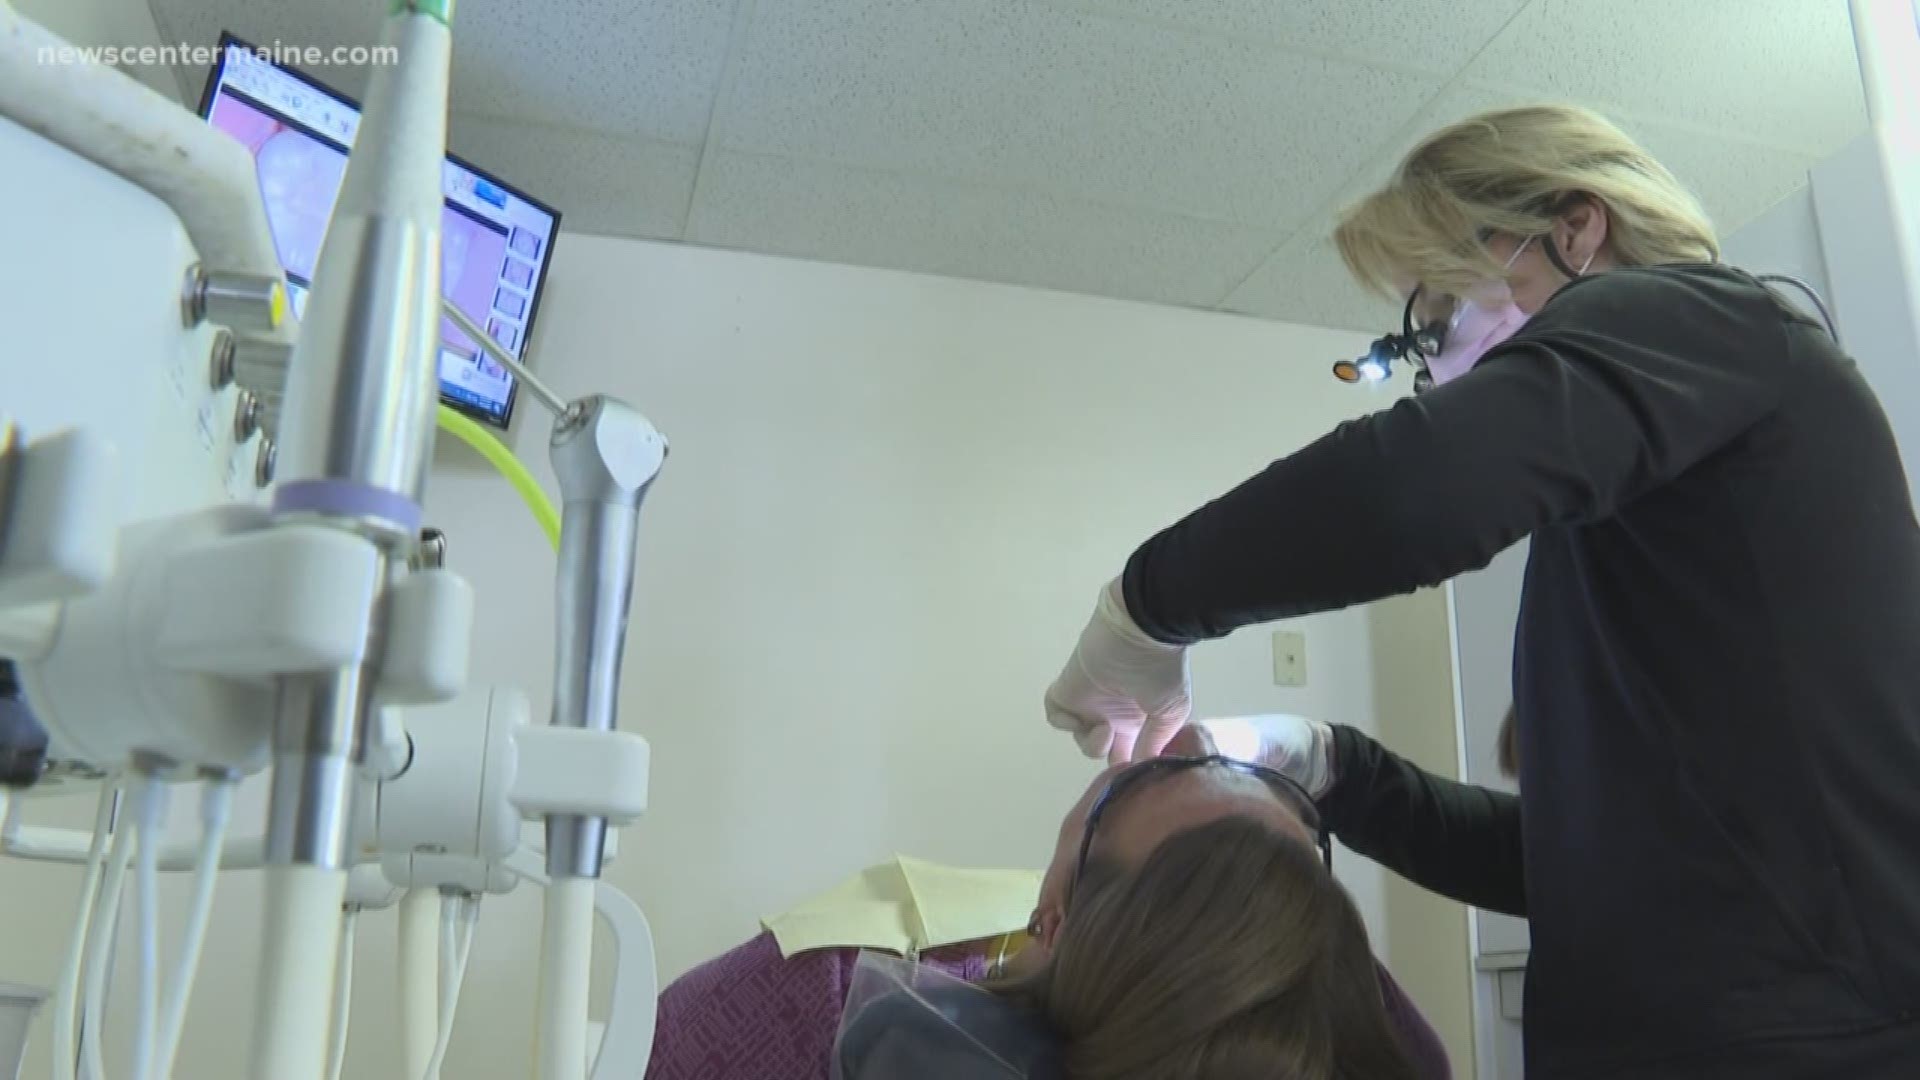 Dental hygienists work independently of dentists in Maine but few know it |  newscentermaine.com